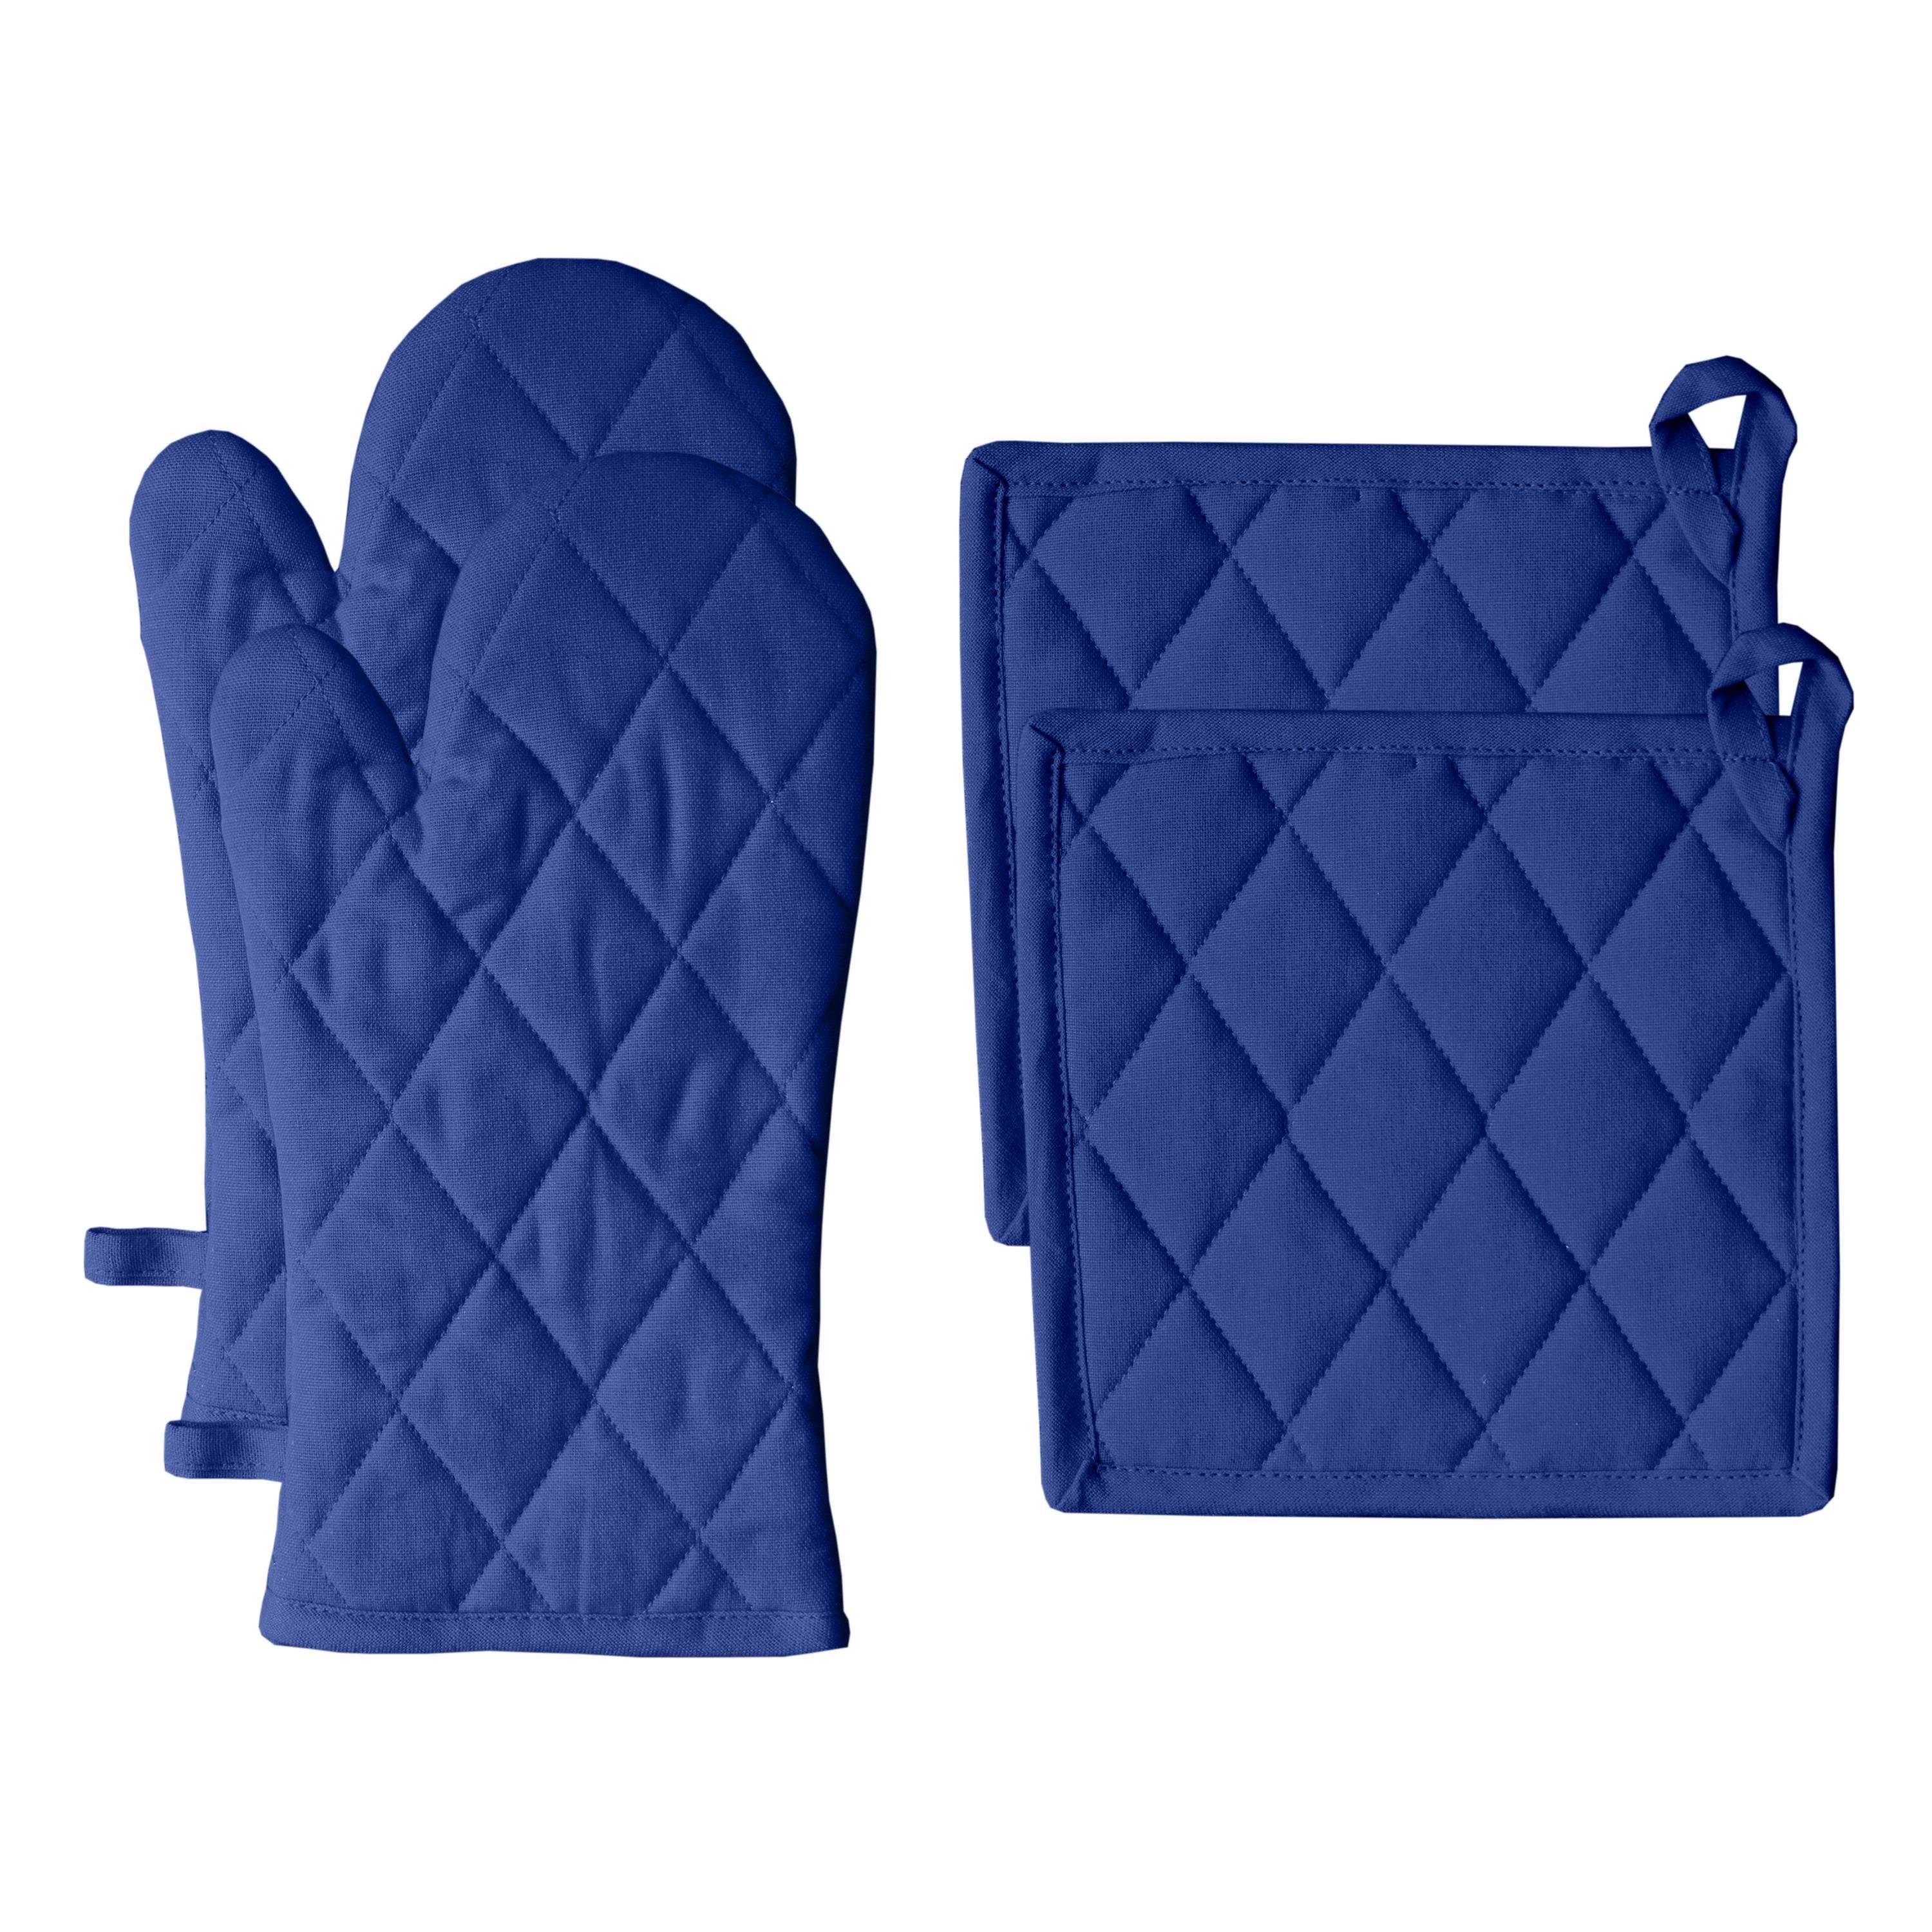 https://ak1.ostkcdn.com/images/products/is/images/direct/ffd14174b4588c9ff686f6e3535a00f02b57cec8/Fabstyles-Solo-Waffle-Cotton-Oven-Mitt-%26-Pot-Holder-Set-of-4.jpg